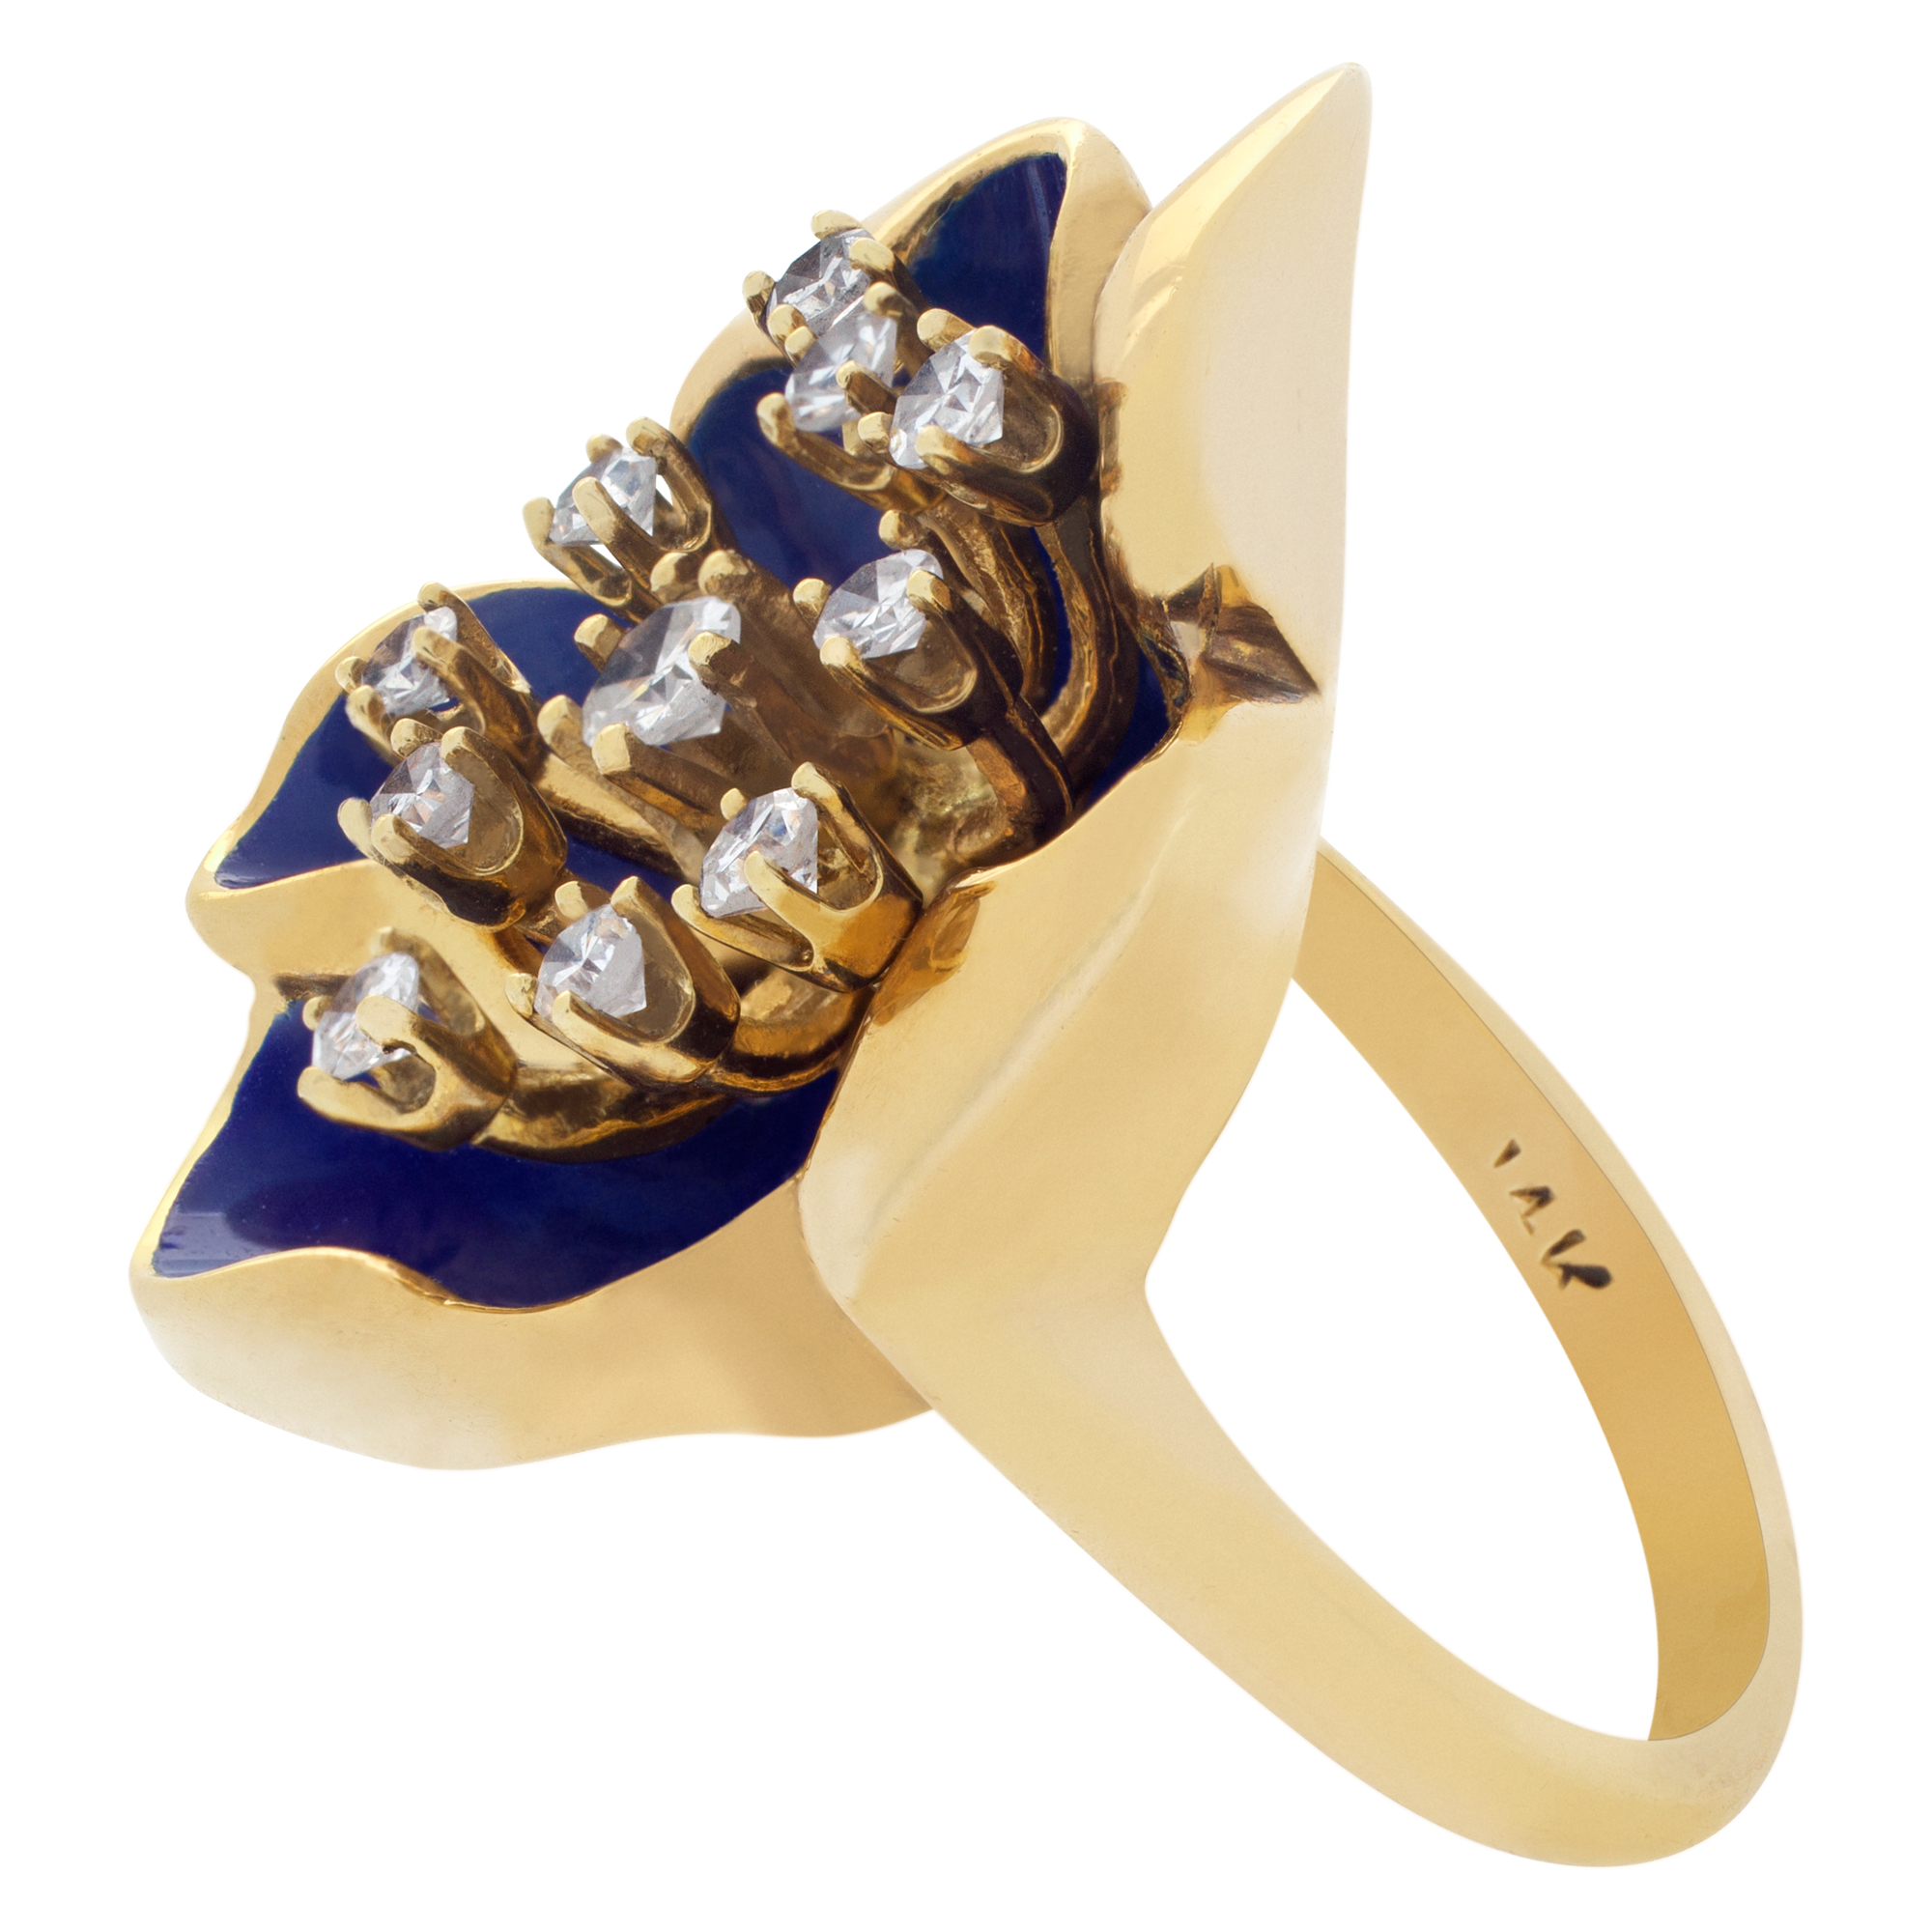 Flower Shape Enamel And Diamond Ring In 14k yellow gold. Size 5.75 image 4